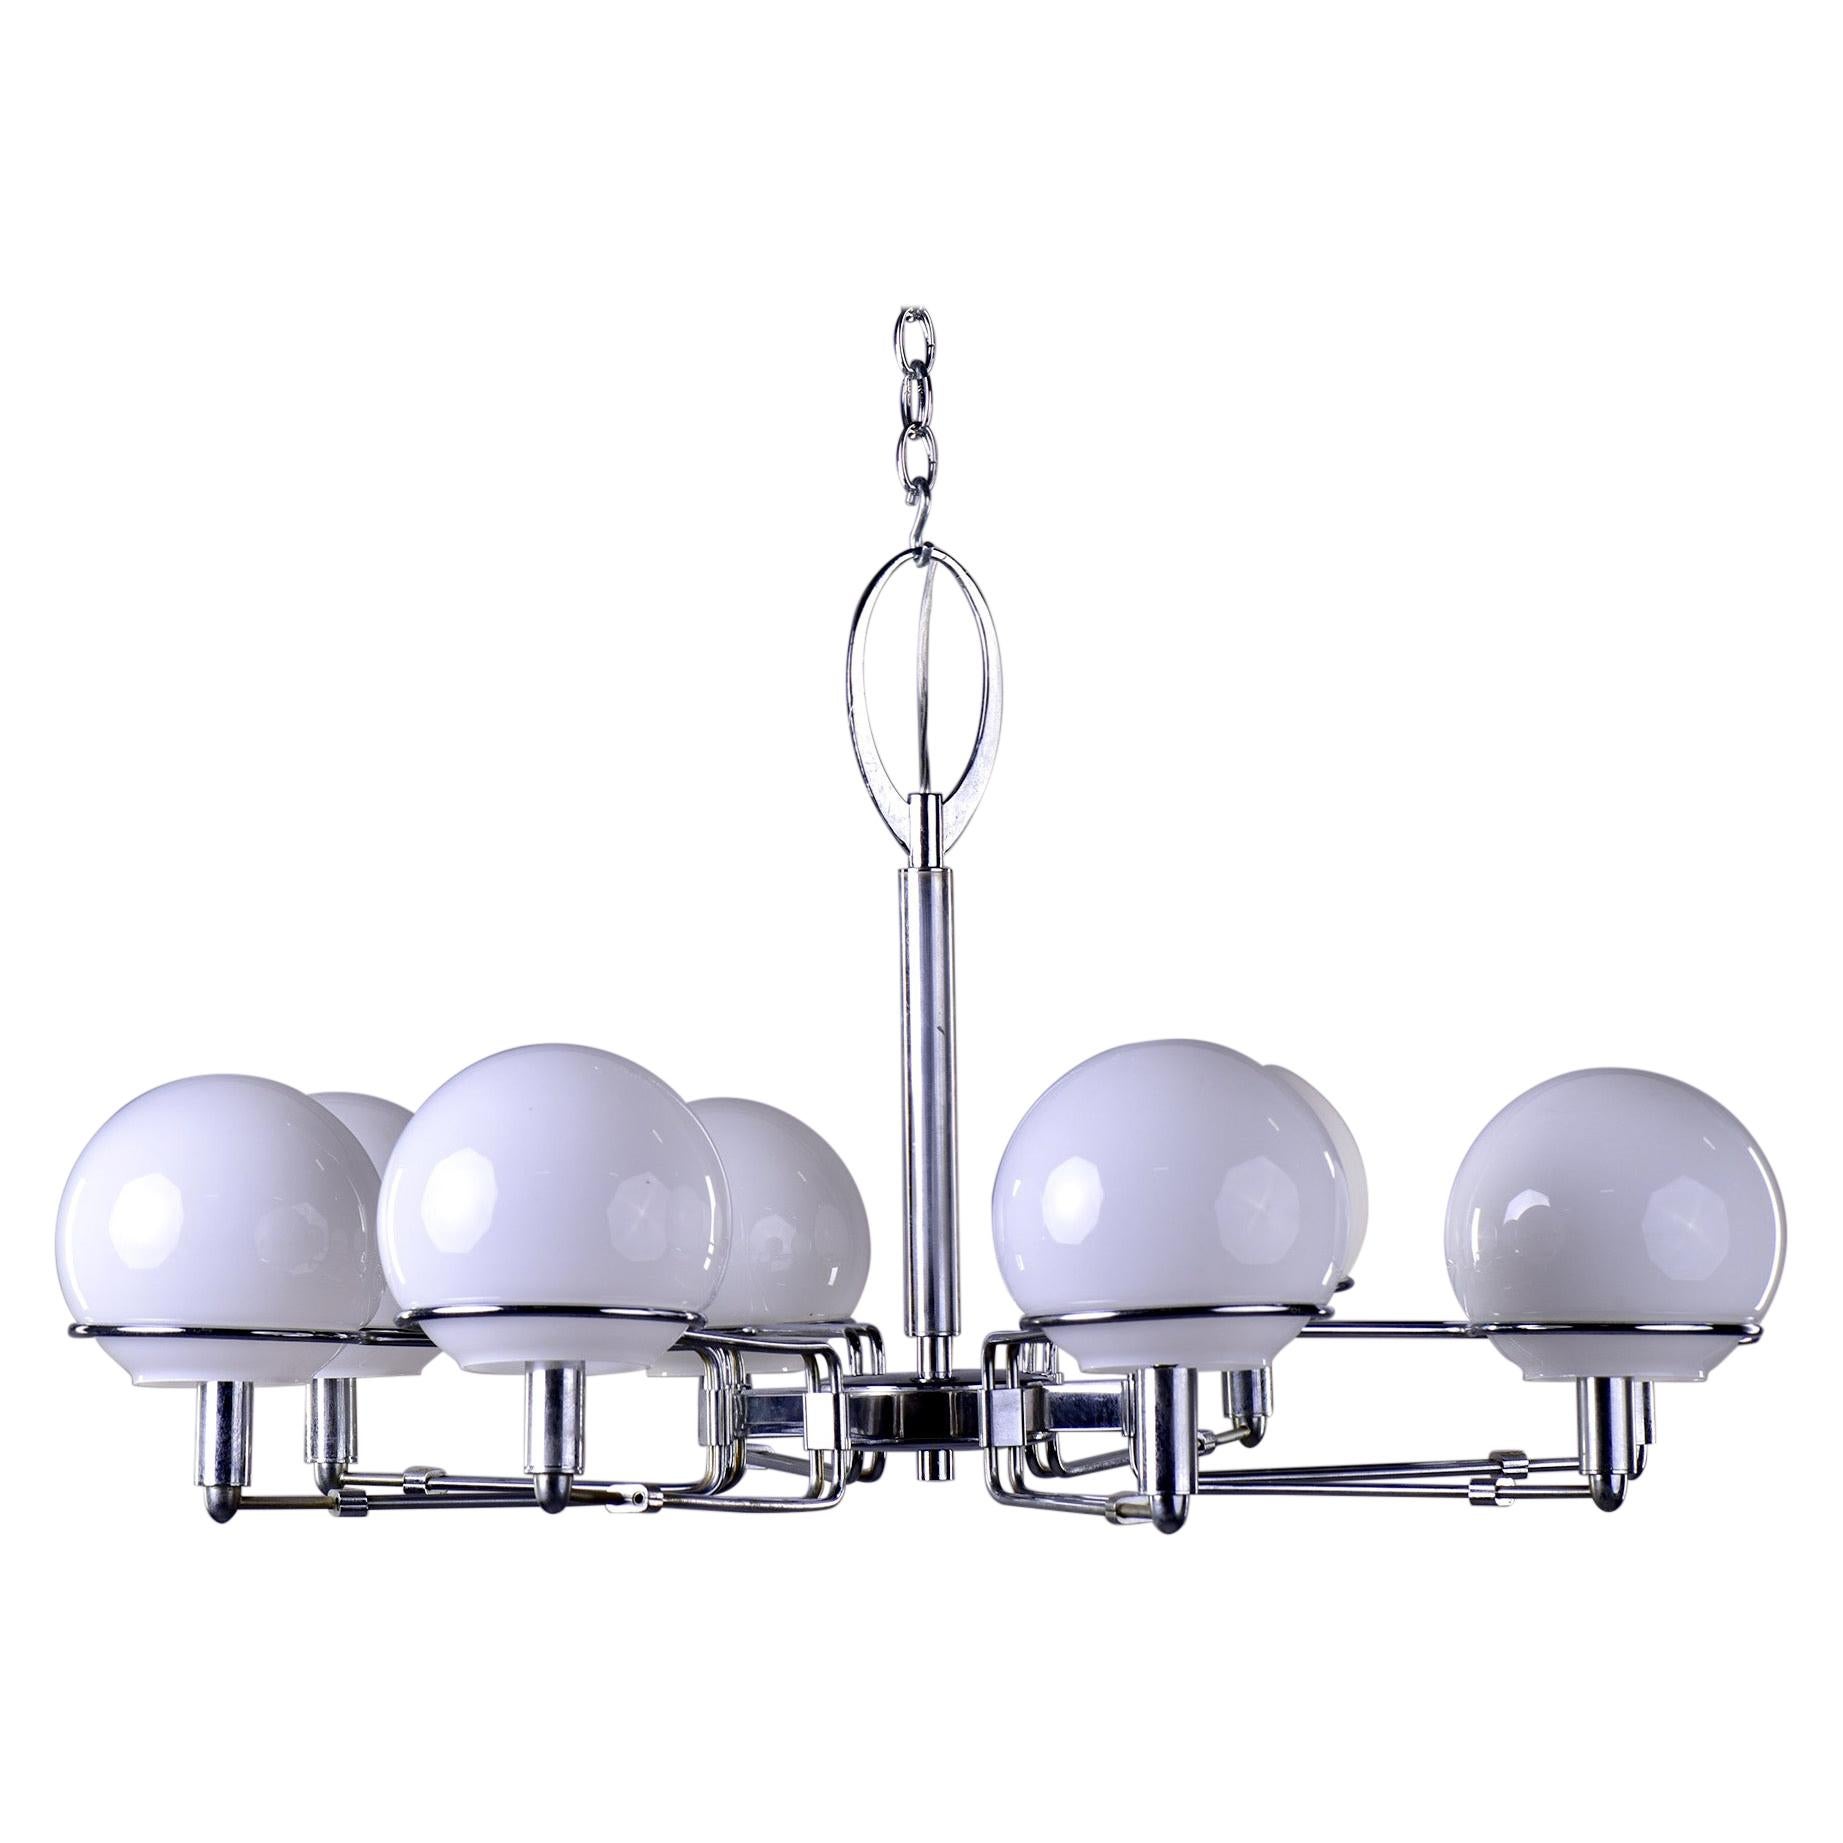 Italian Mid Century 8 Light Fixture with White Globes and Chrome Base